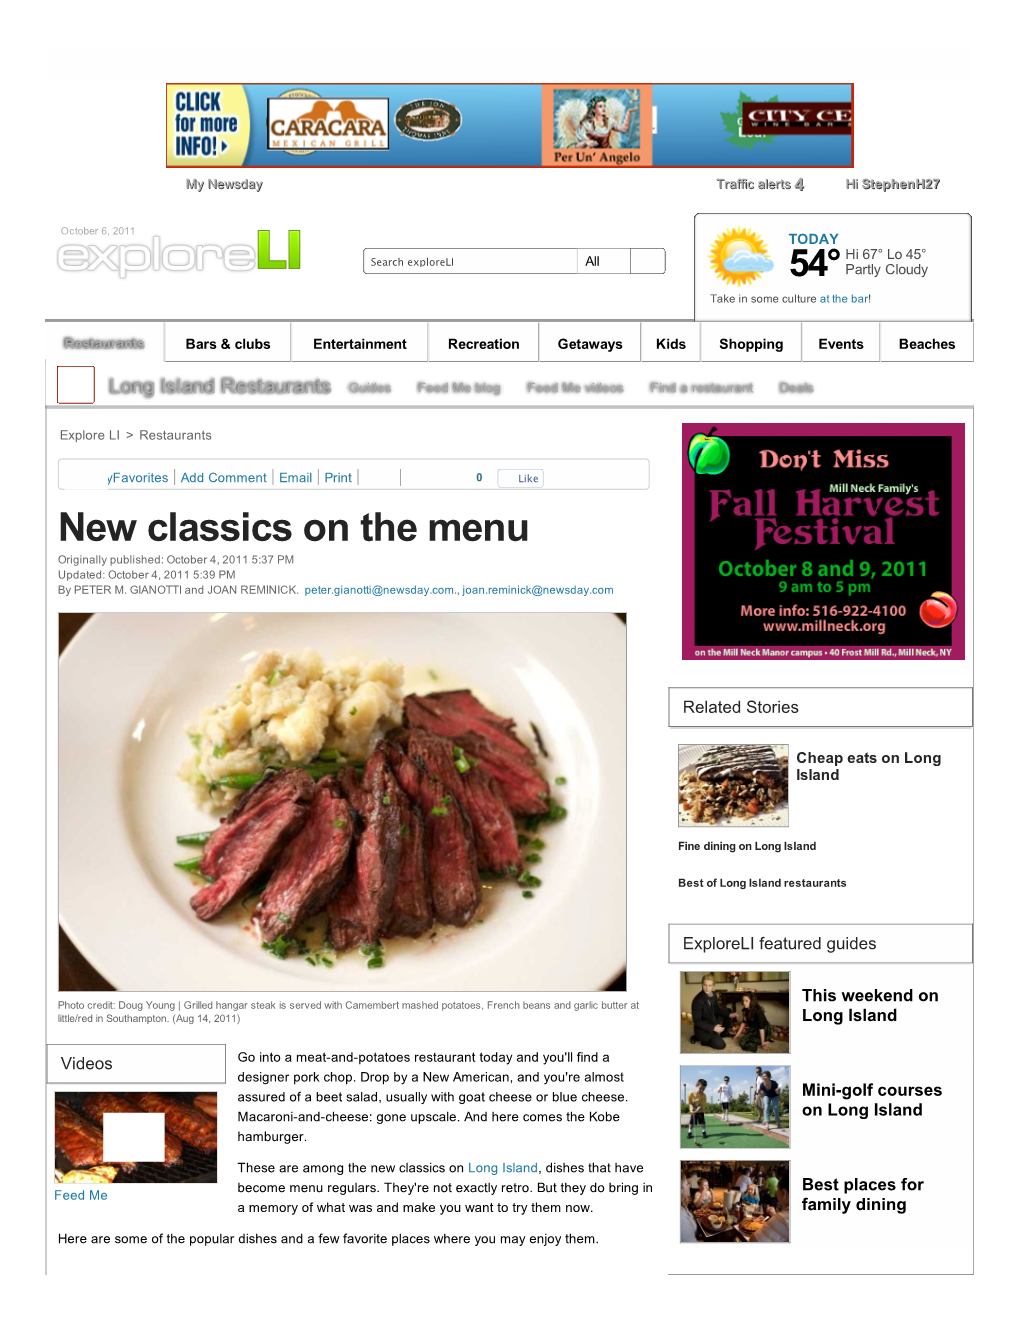 New Classics on the Menu Originally Published: October 4, 2011 5:37 PM Updated: October 4, 2011 5:39 PM by PETER M